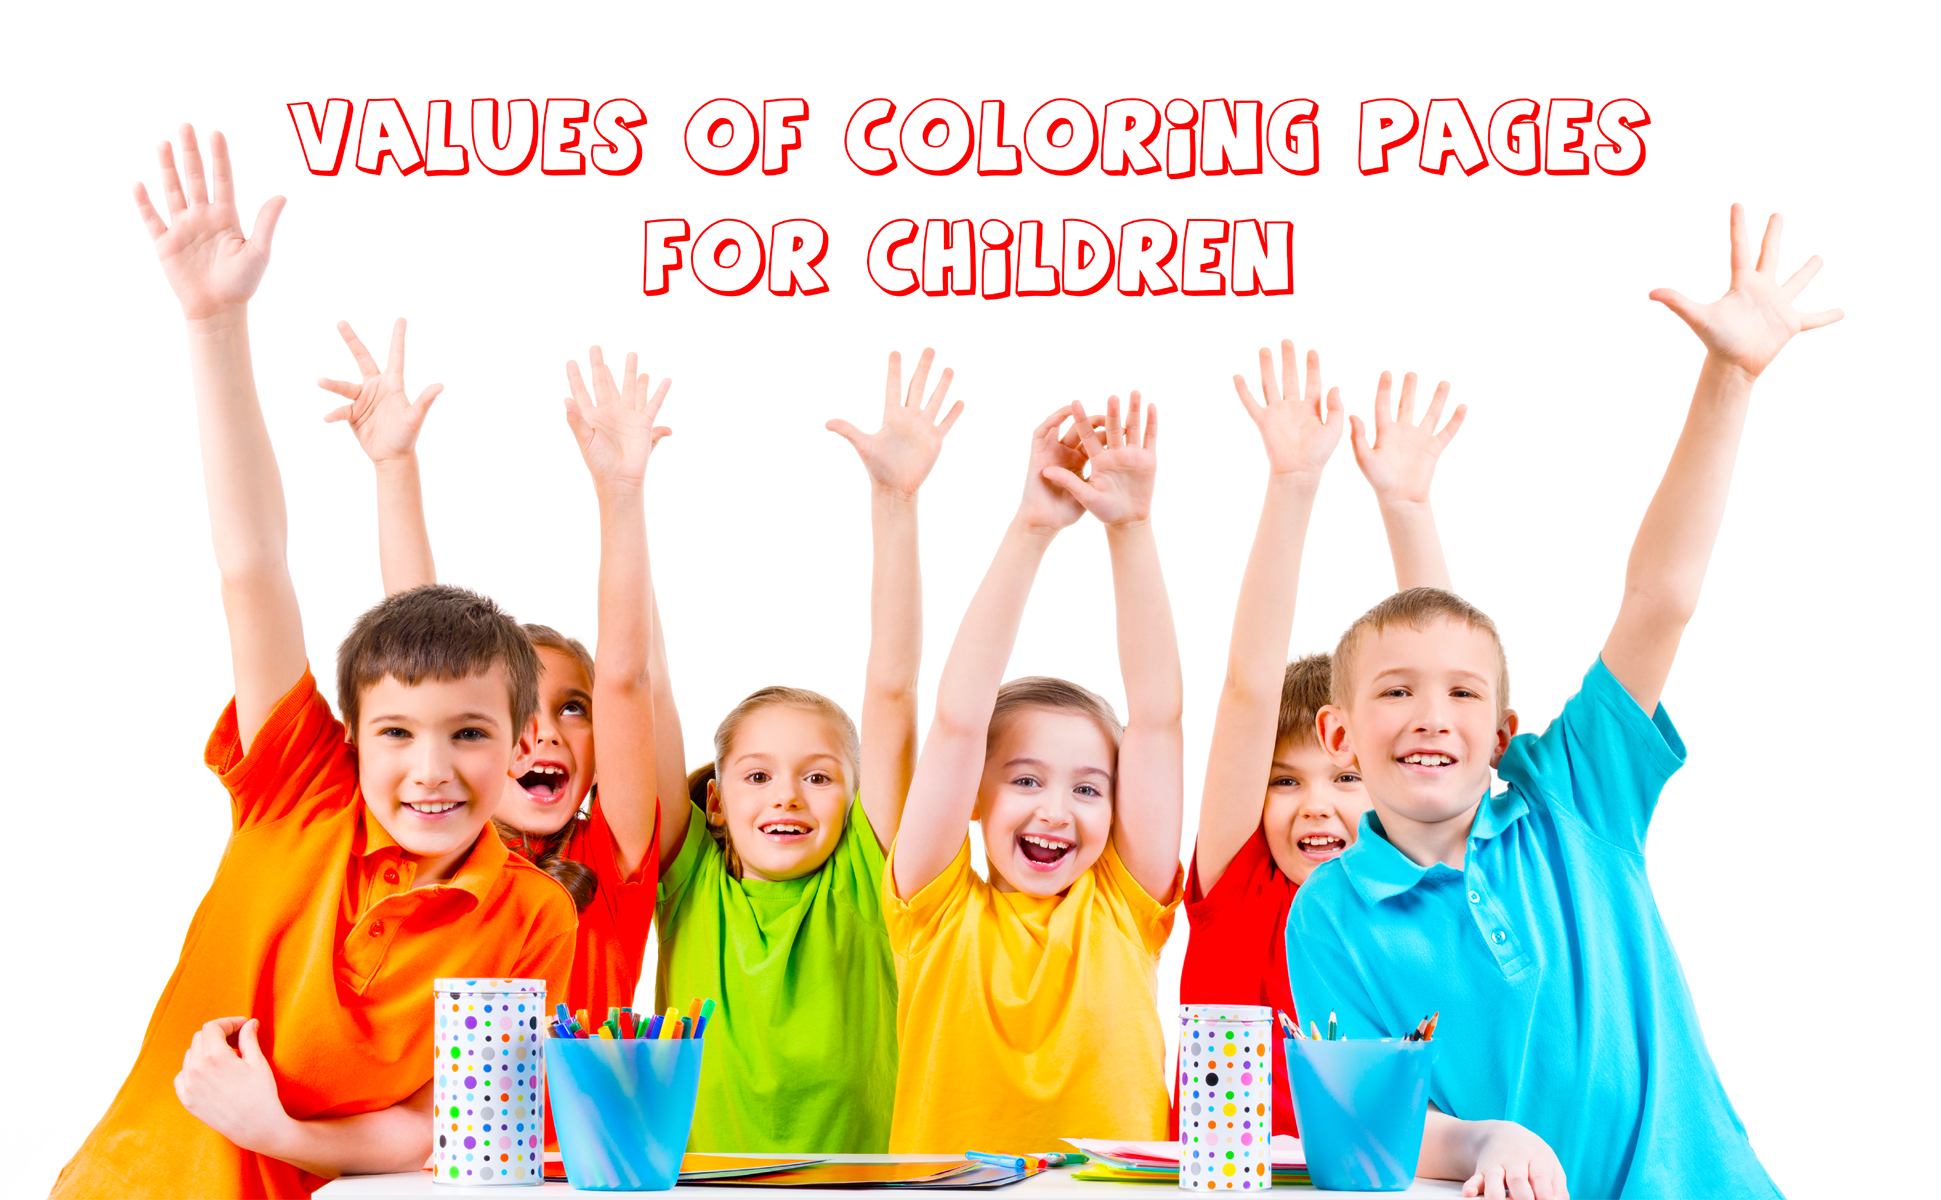 Values of coloring pages for children